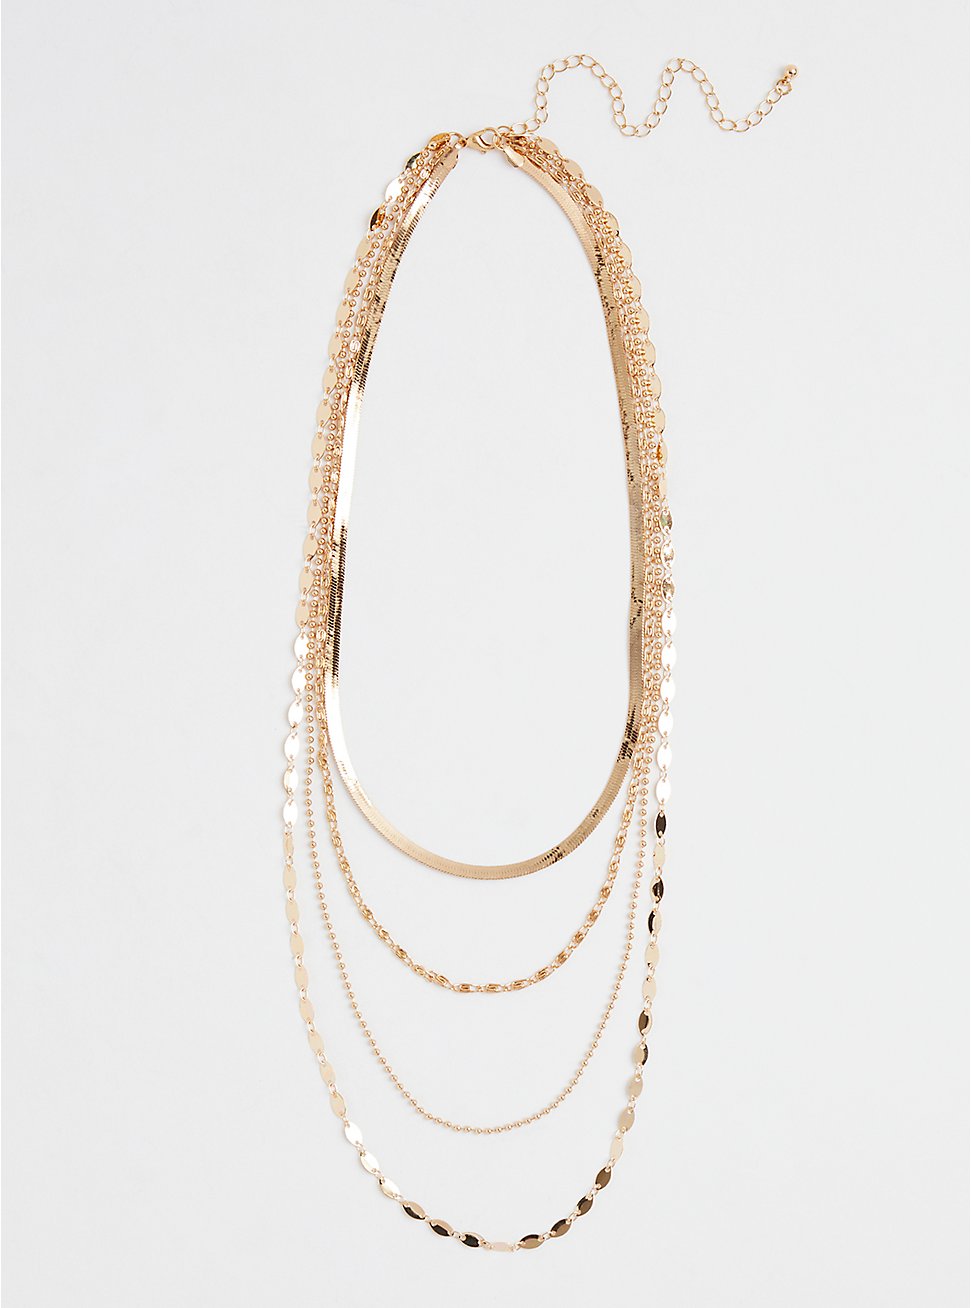 Plus Size Textured Chain Layered Necklace - Gold Tone, , hi-res